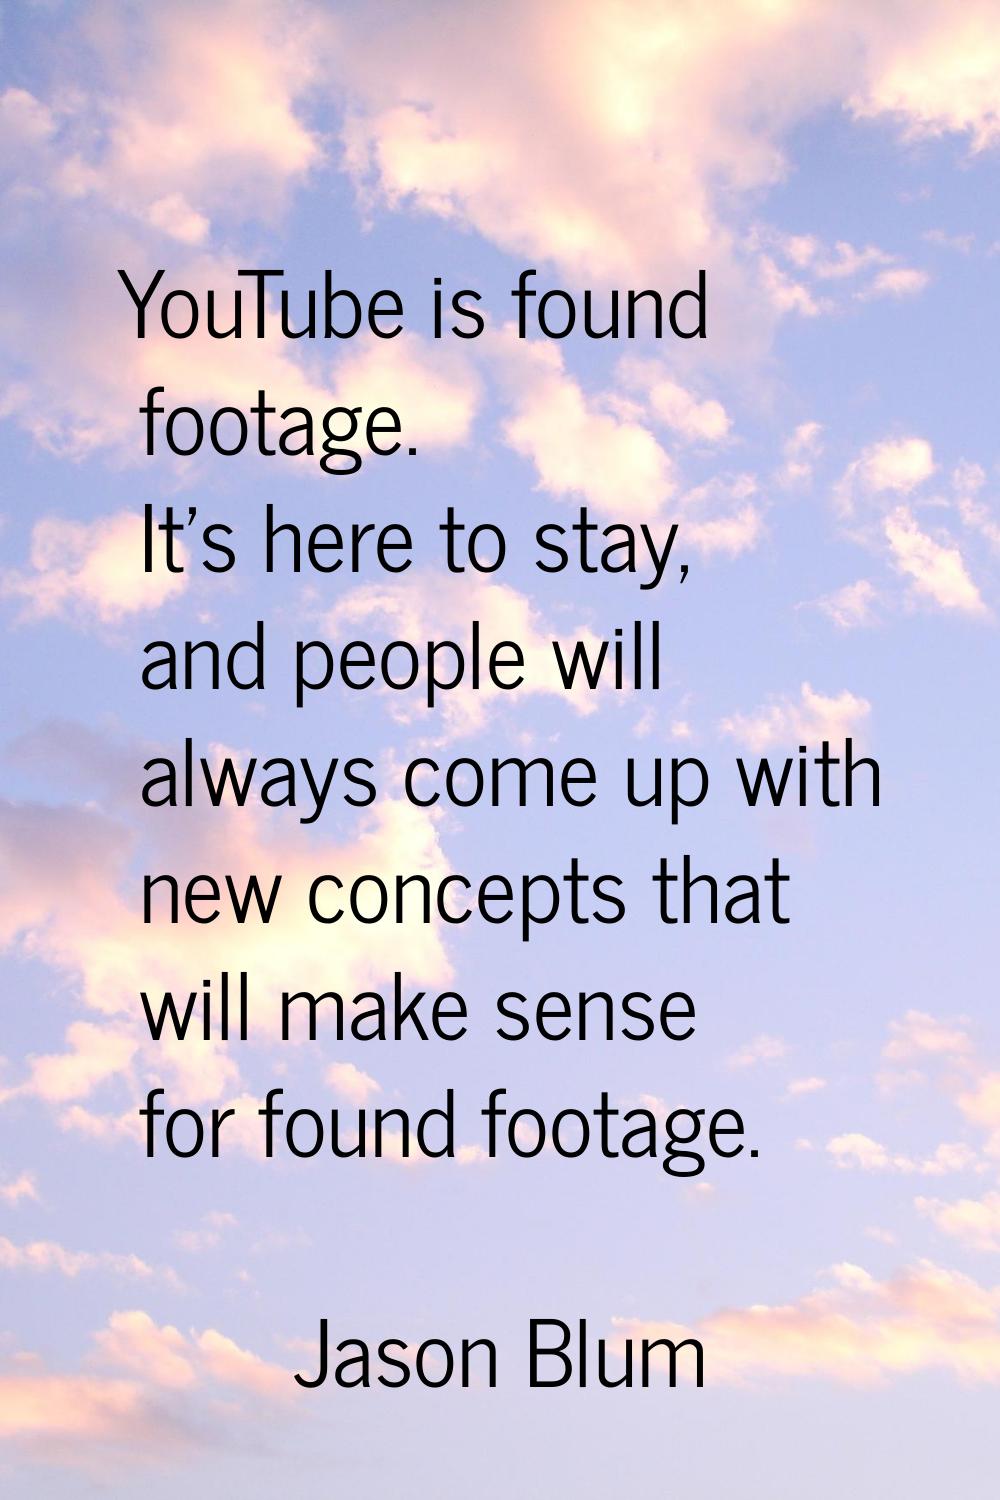 YouTube is found footage. It's here to stay, and people will always come up with new concepts that 